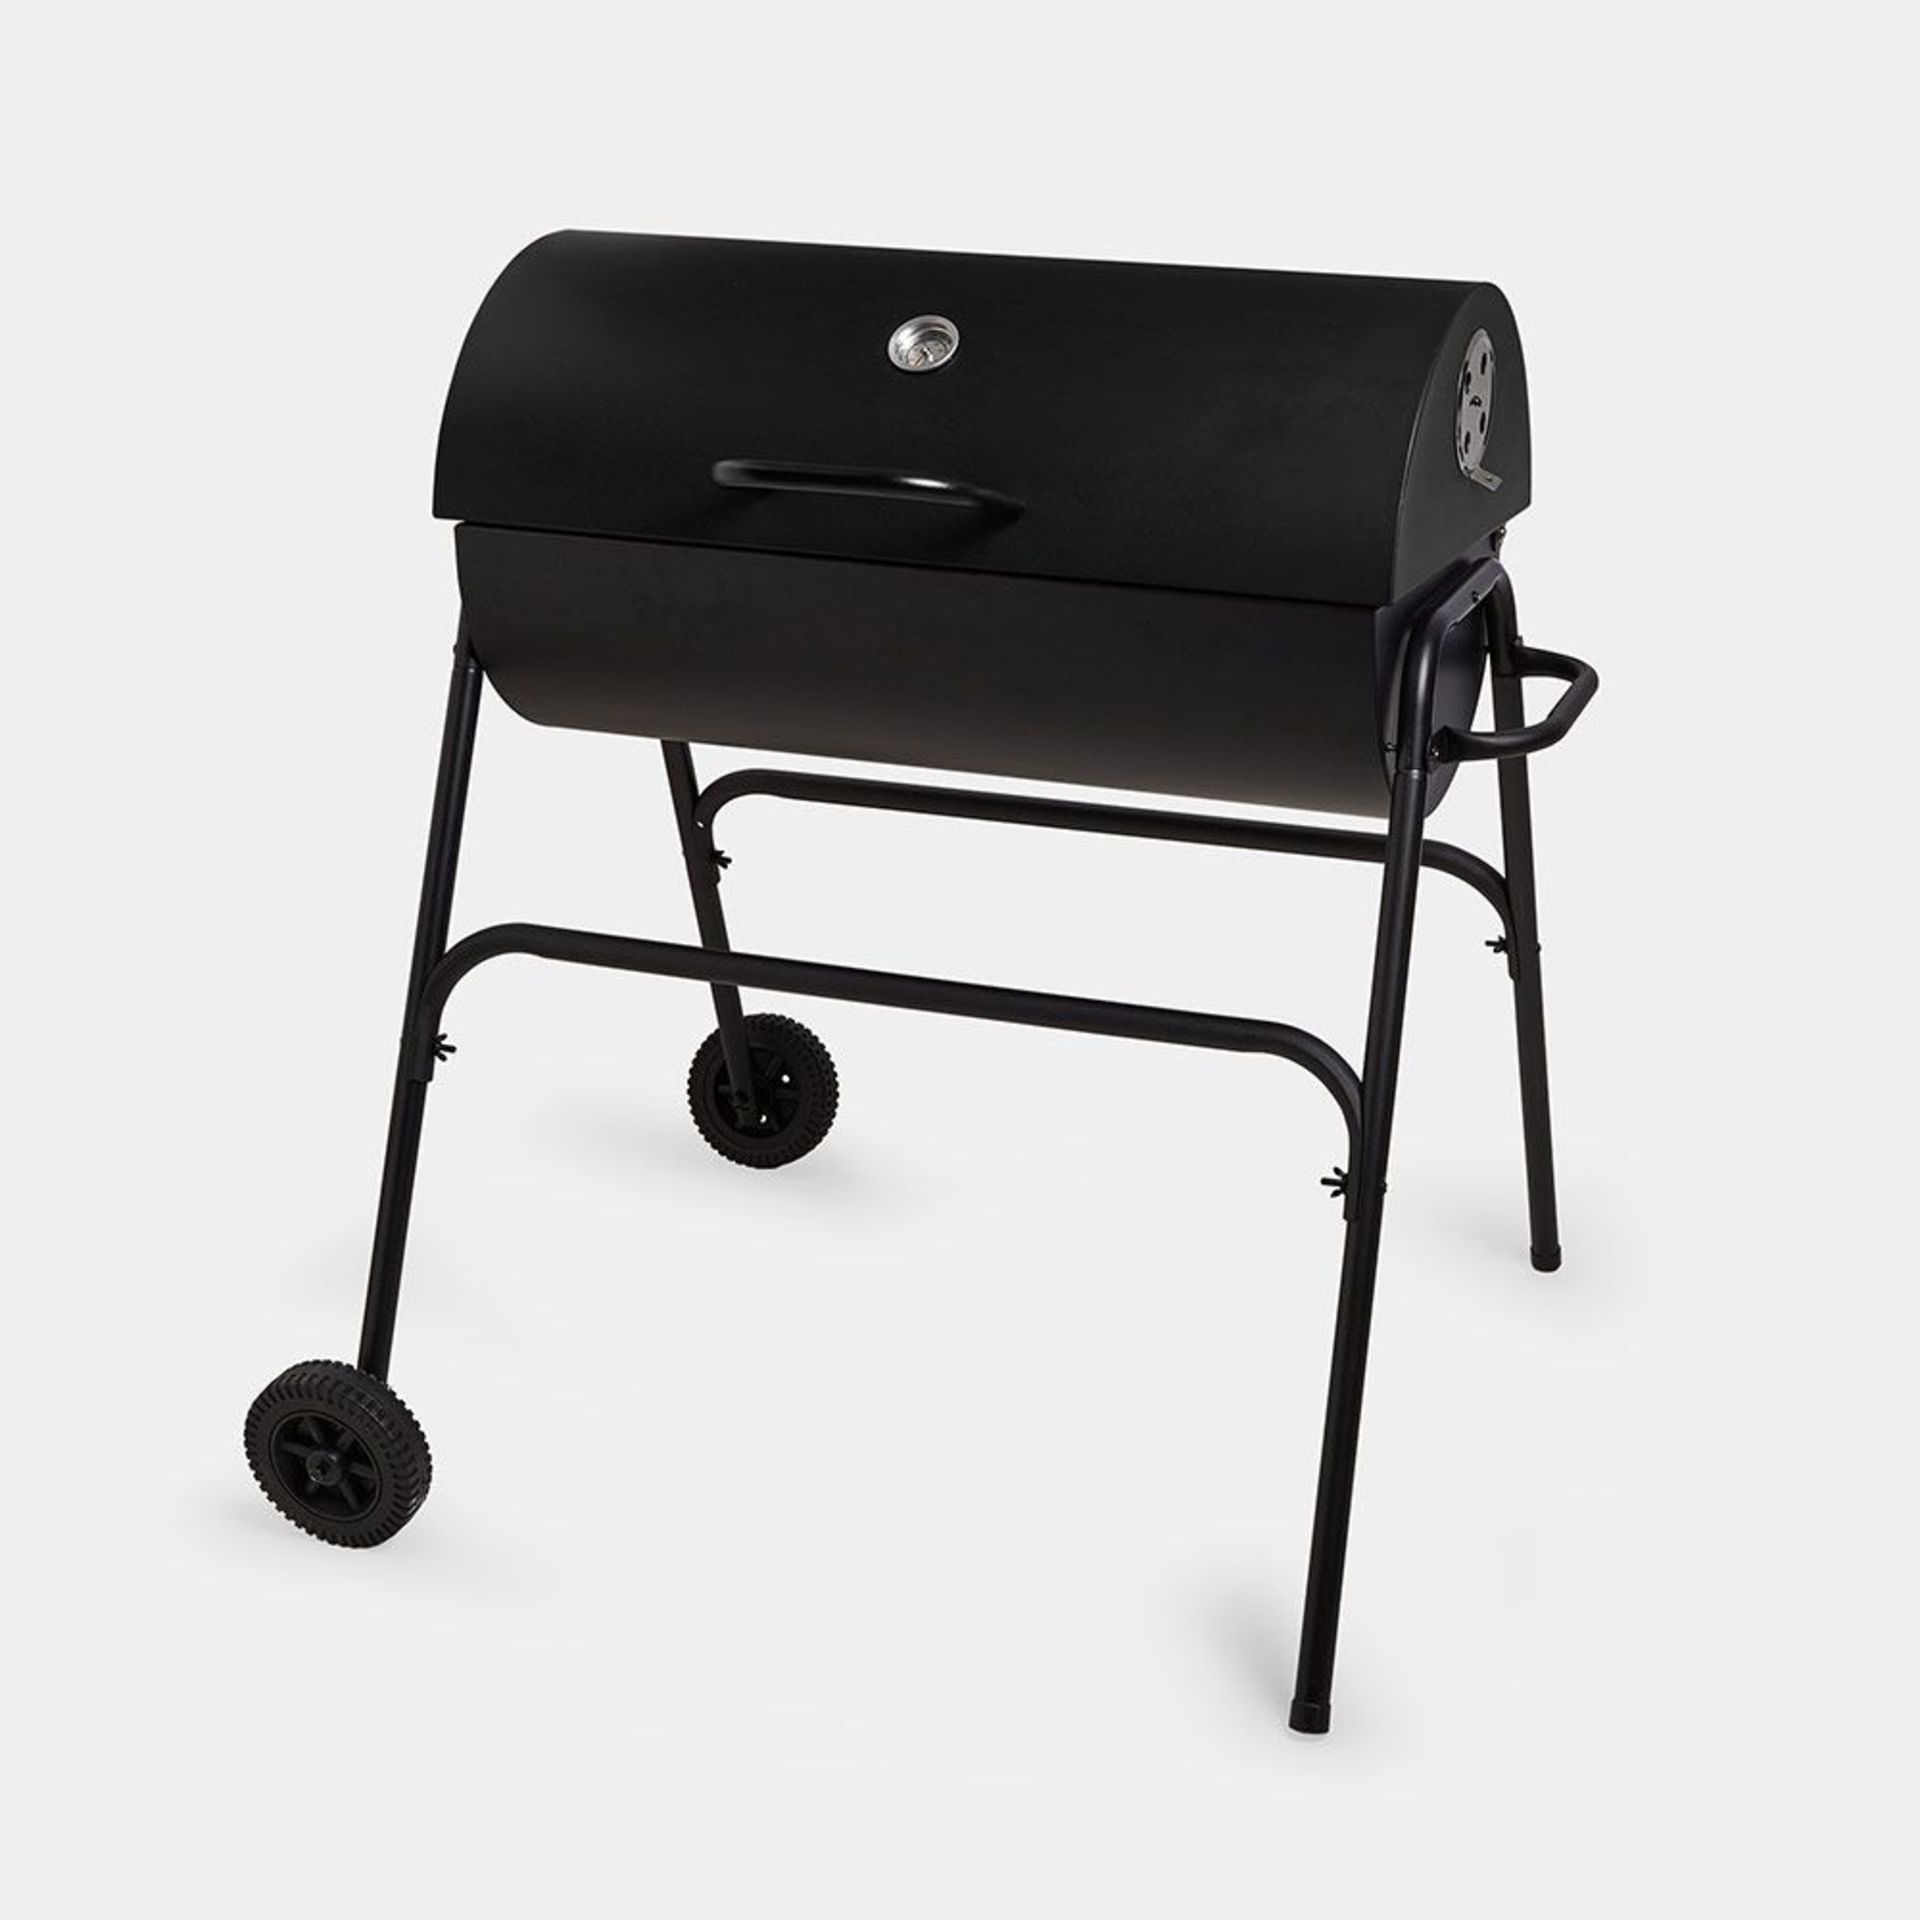 Barrel Charcoal BBQ. - BI. Get your summer off to a sizzling start with this charcoal barrel BBQ –